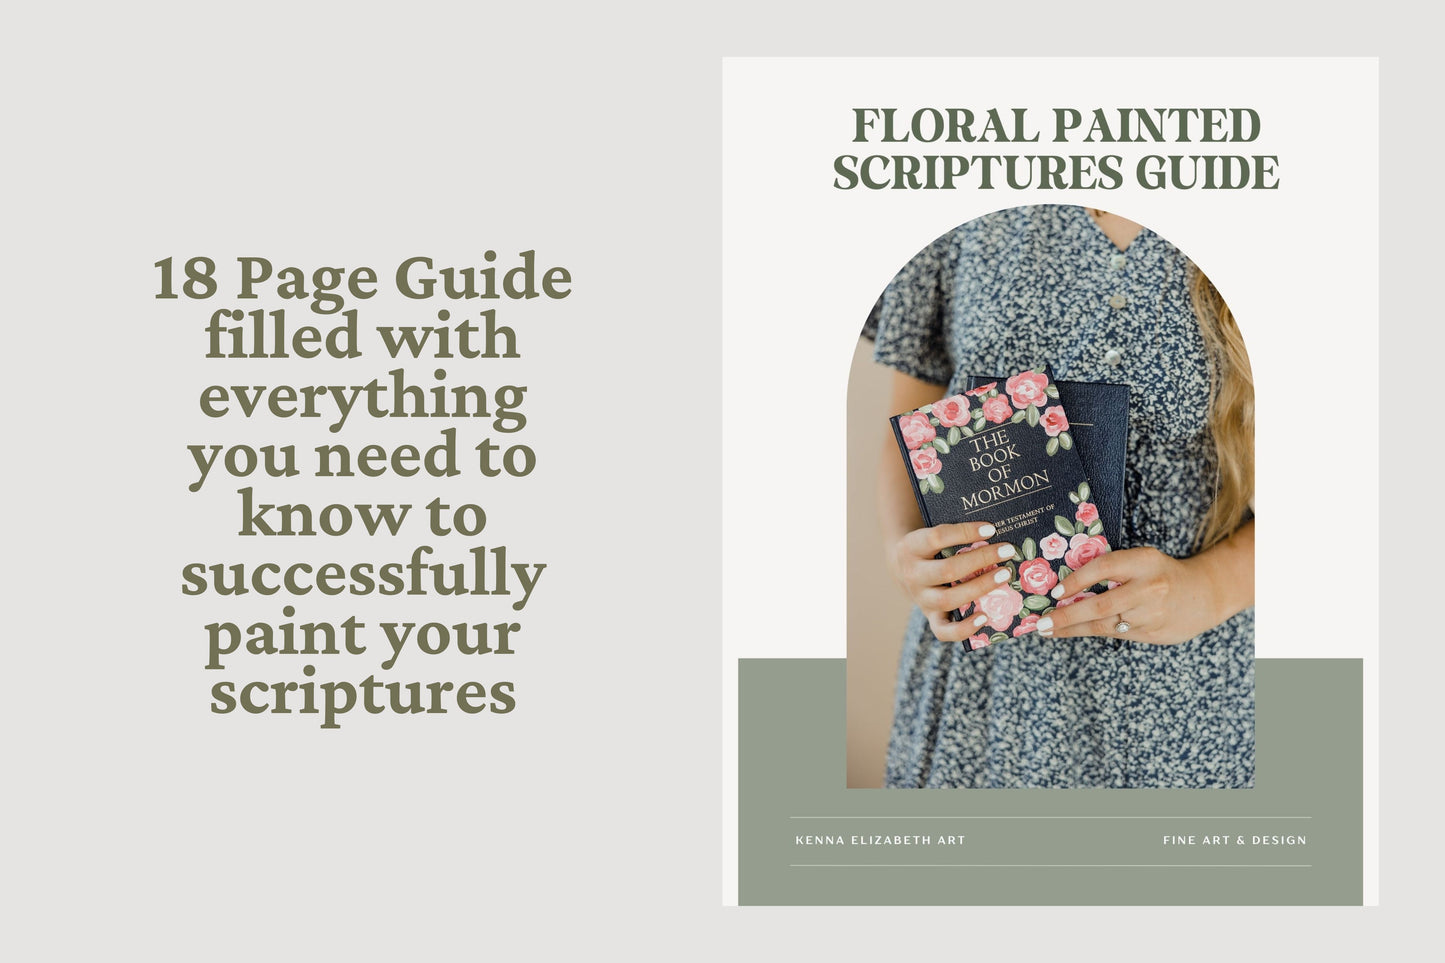 Floral Painted Scriptures: A Step-by-Step Guide